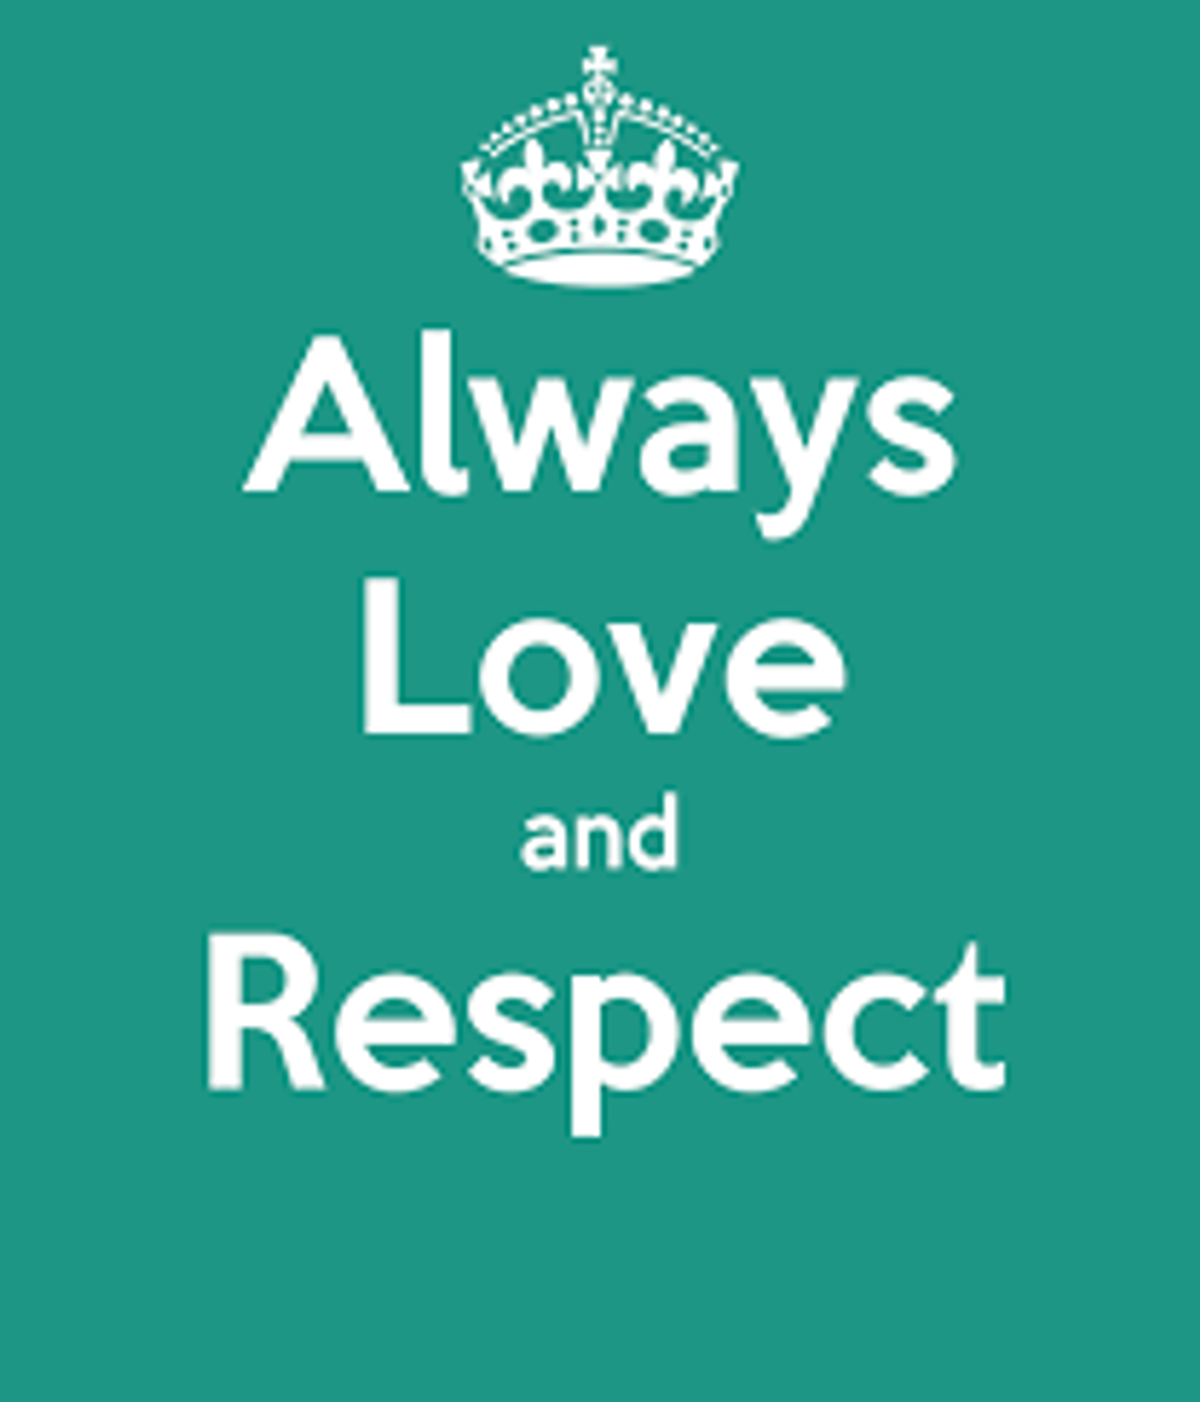 Love And Respect: Are They The Same Thing?